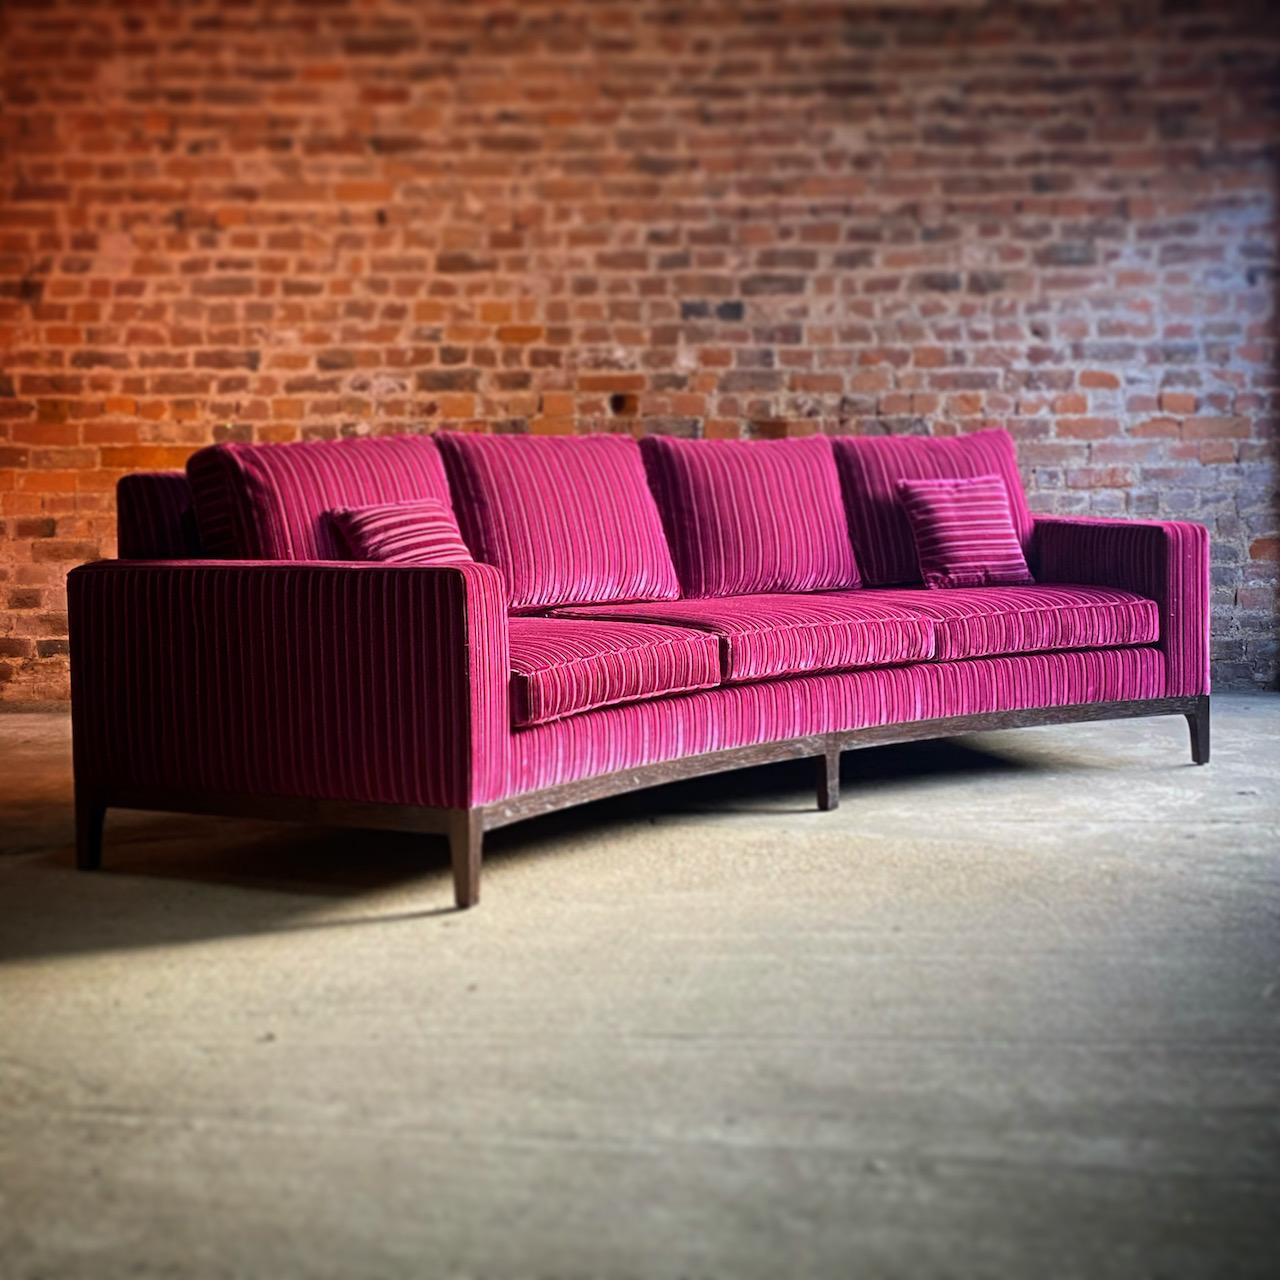 Exceptional large bespoke curved sofa of the highest quality, standing at over 10 feet in length upholstered in the most luxurious magenta velvet with a feint black stripe, bolstered with loose back and seat cushions, sitting on rich rosewood frames